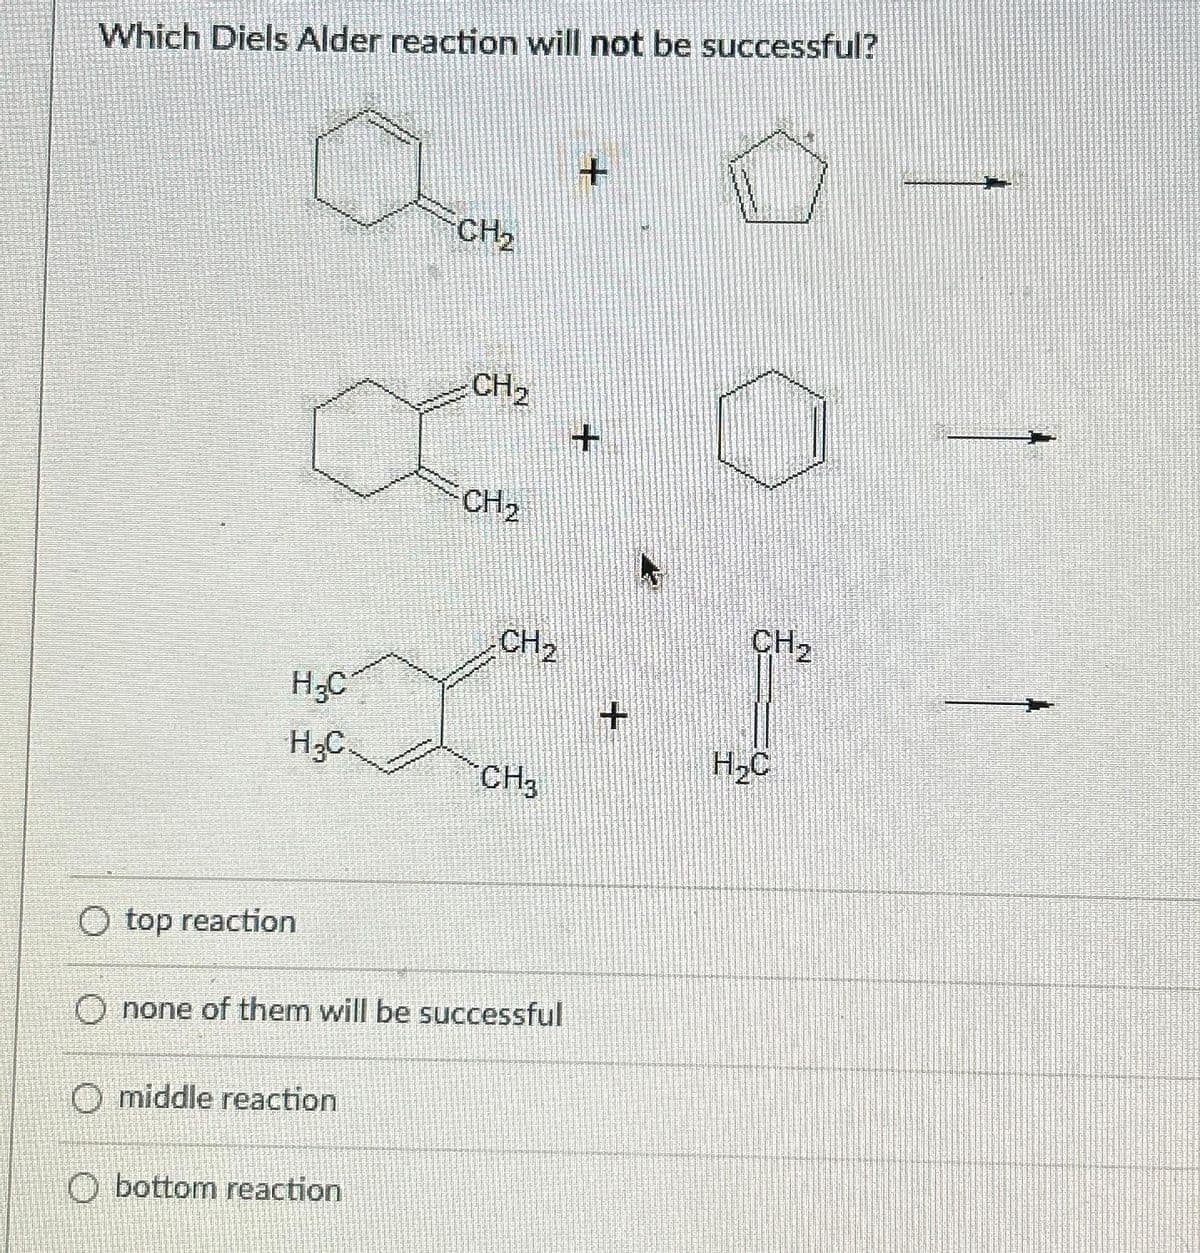 Which Diels Alder reaction will not be successful?
a
H₂C
H₂C
O top reaction
middle reaction
CH₂
Obottom reaction
CH₂
CH₂
CH₂
none of them will be successful
CH3
+
+
+
CH₂
H₂C